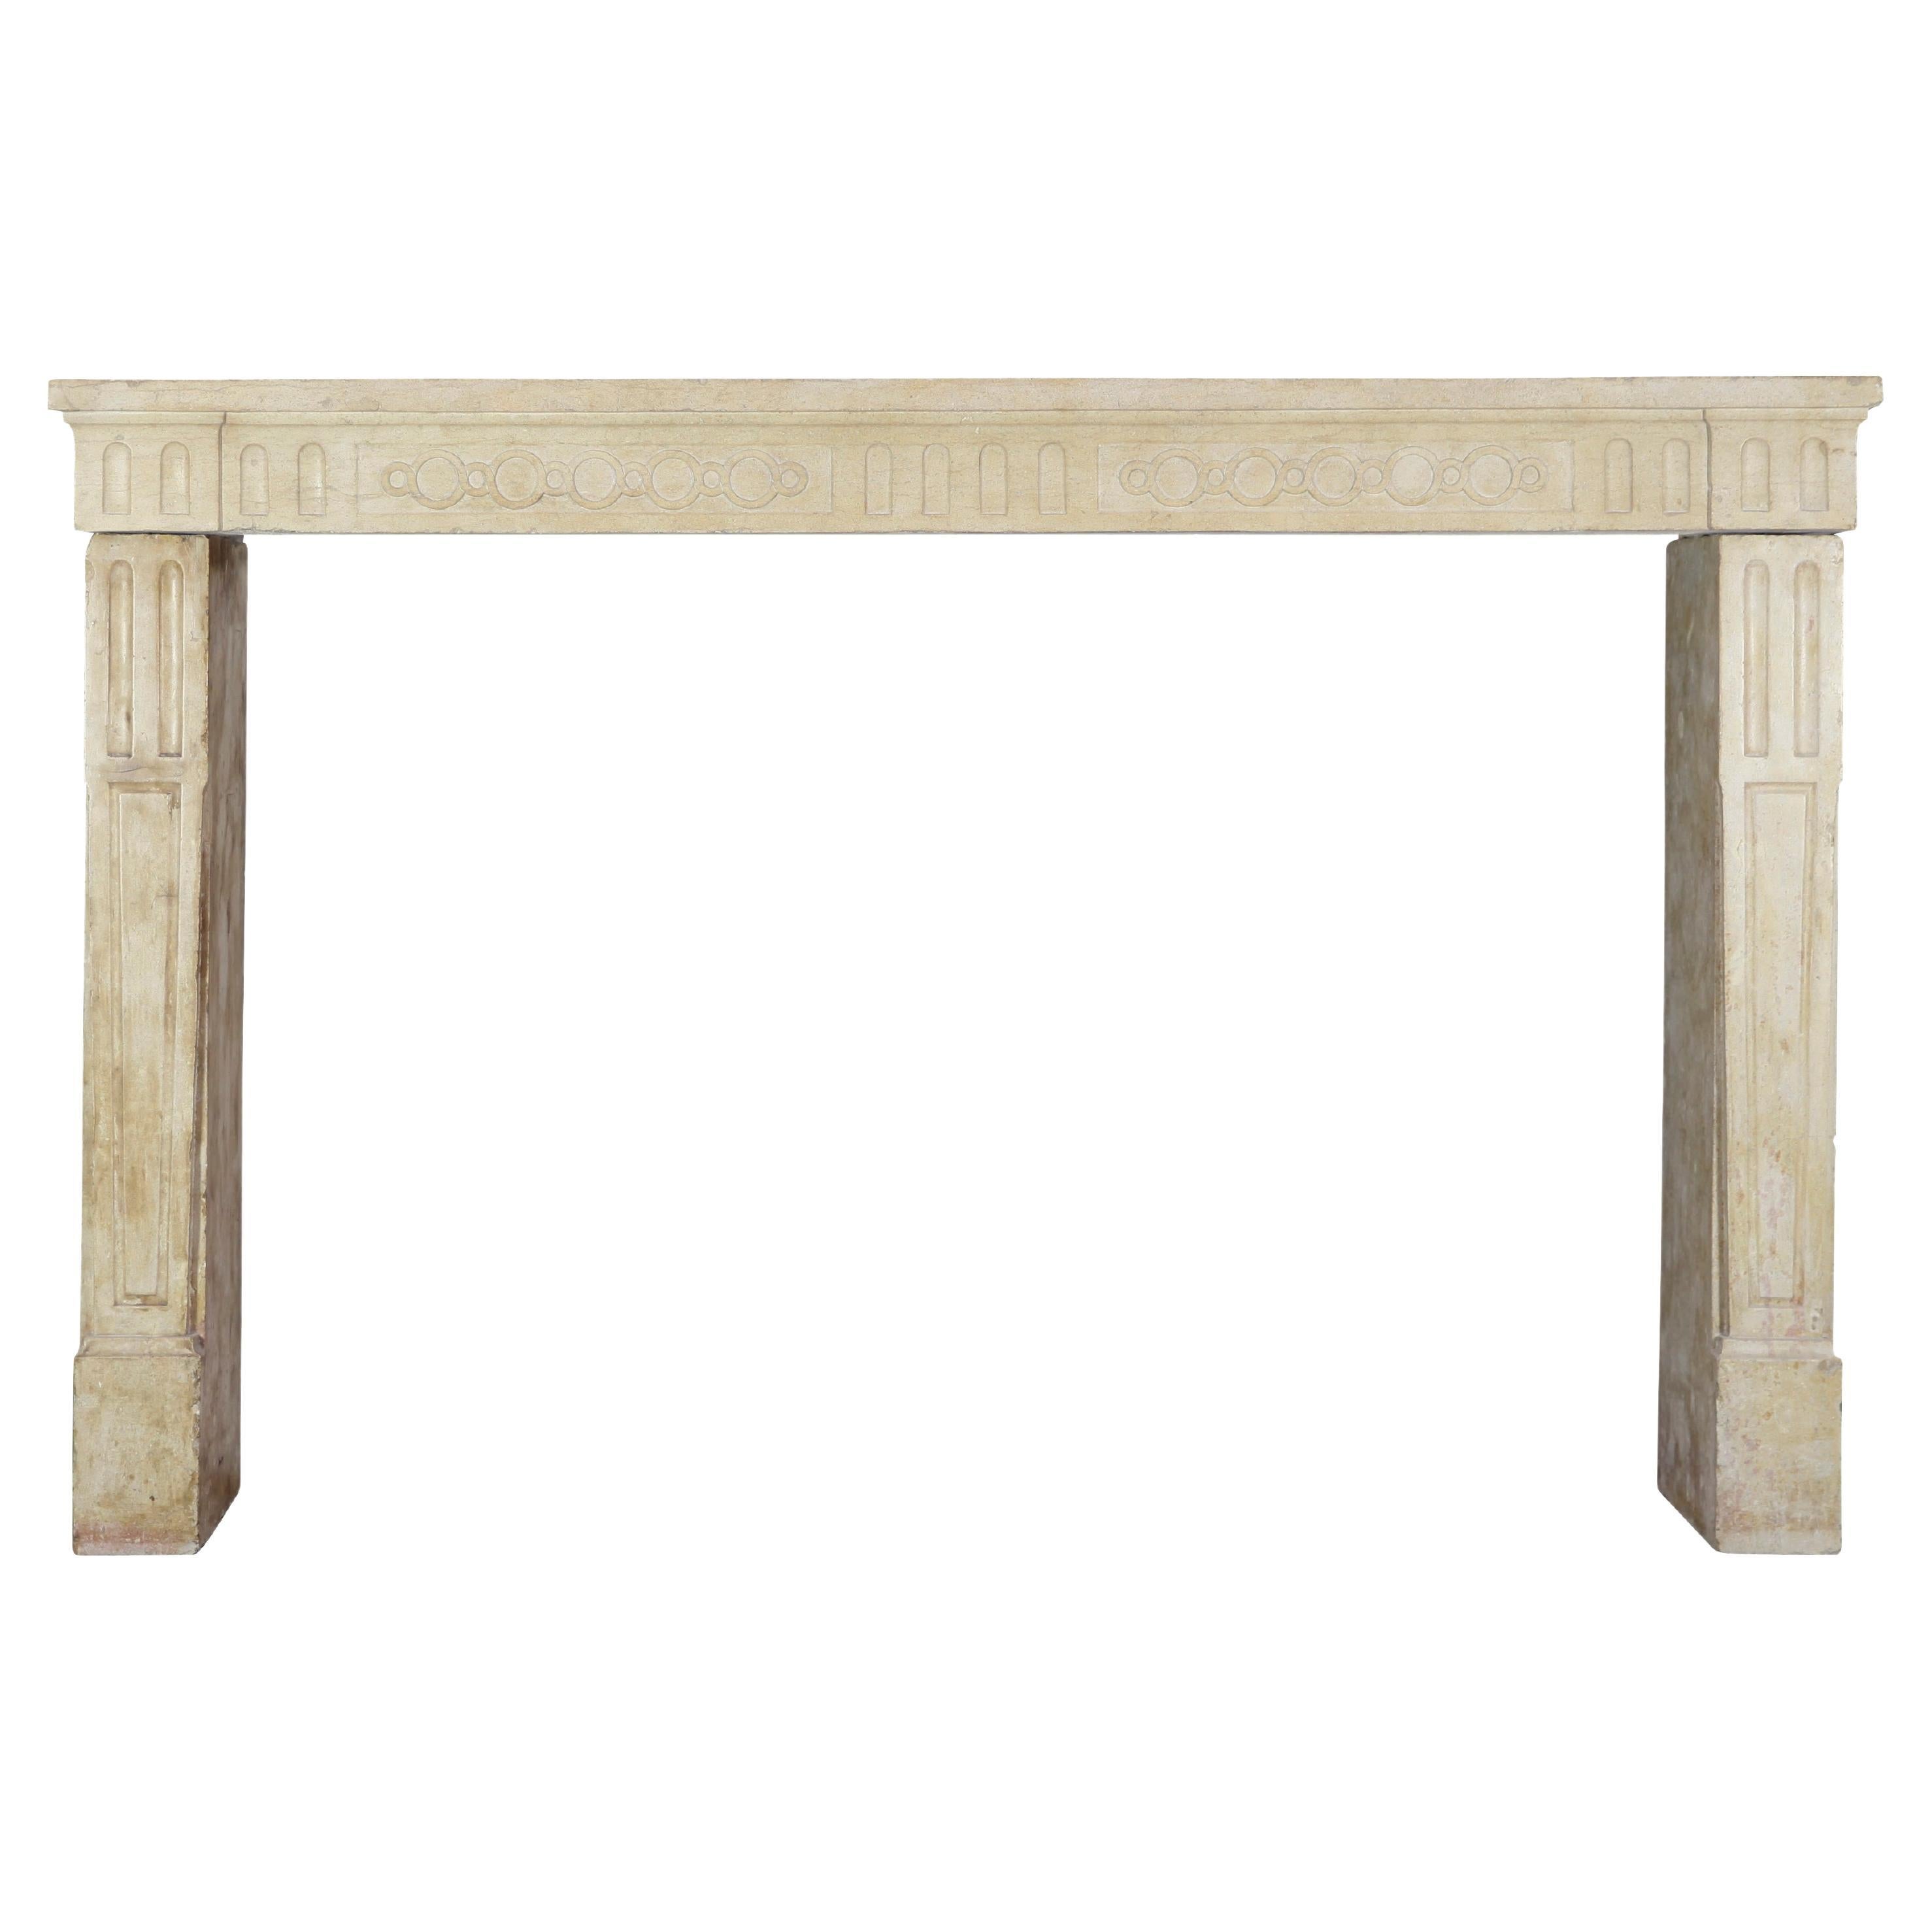 Elegant French Rustic Limestone Fireplace Surround For Sale